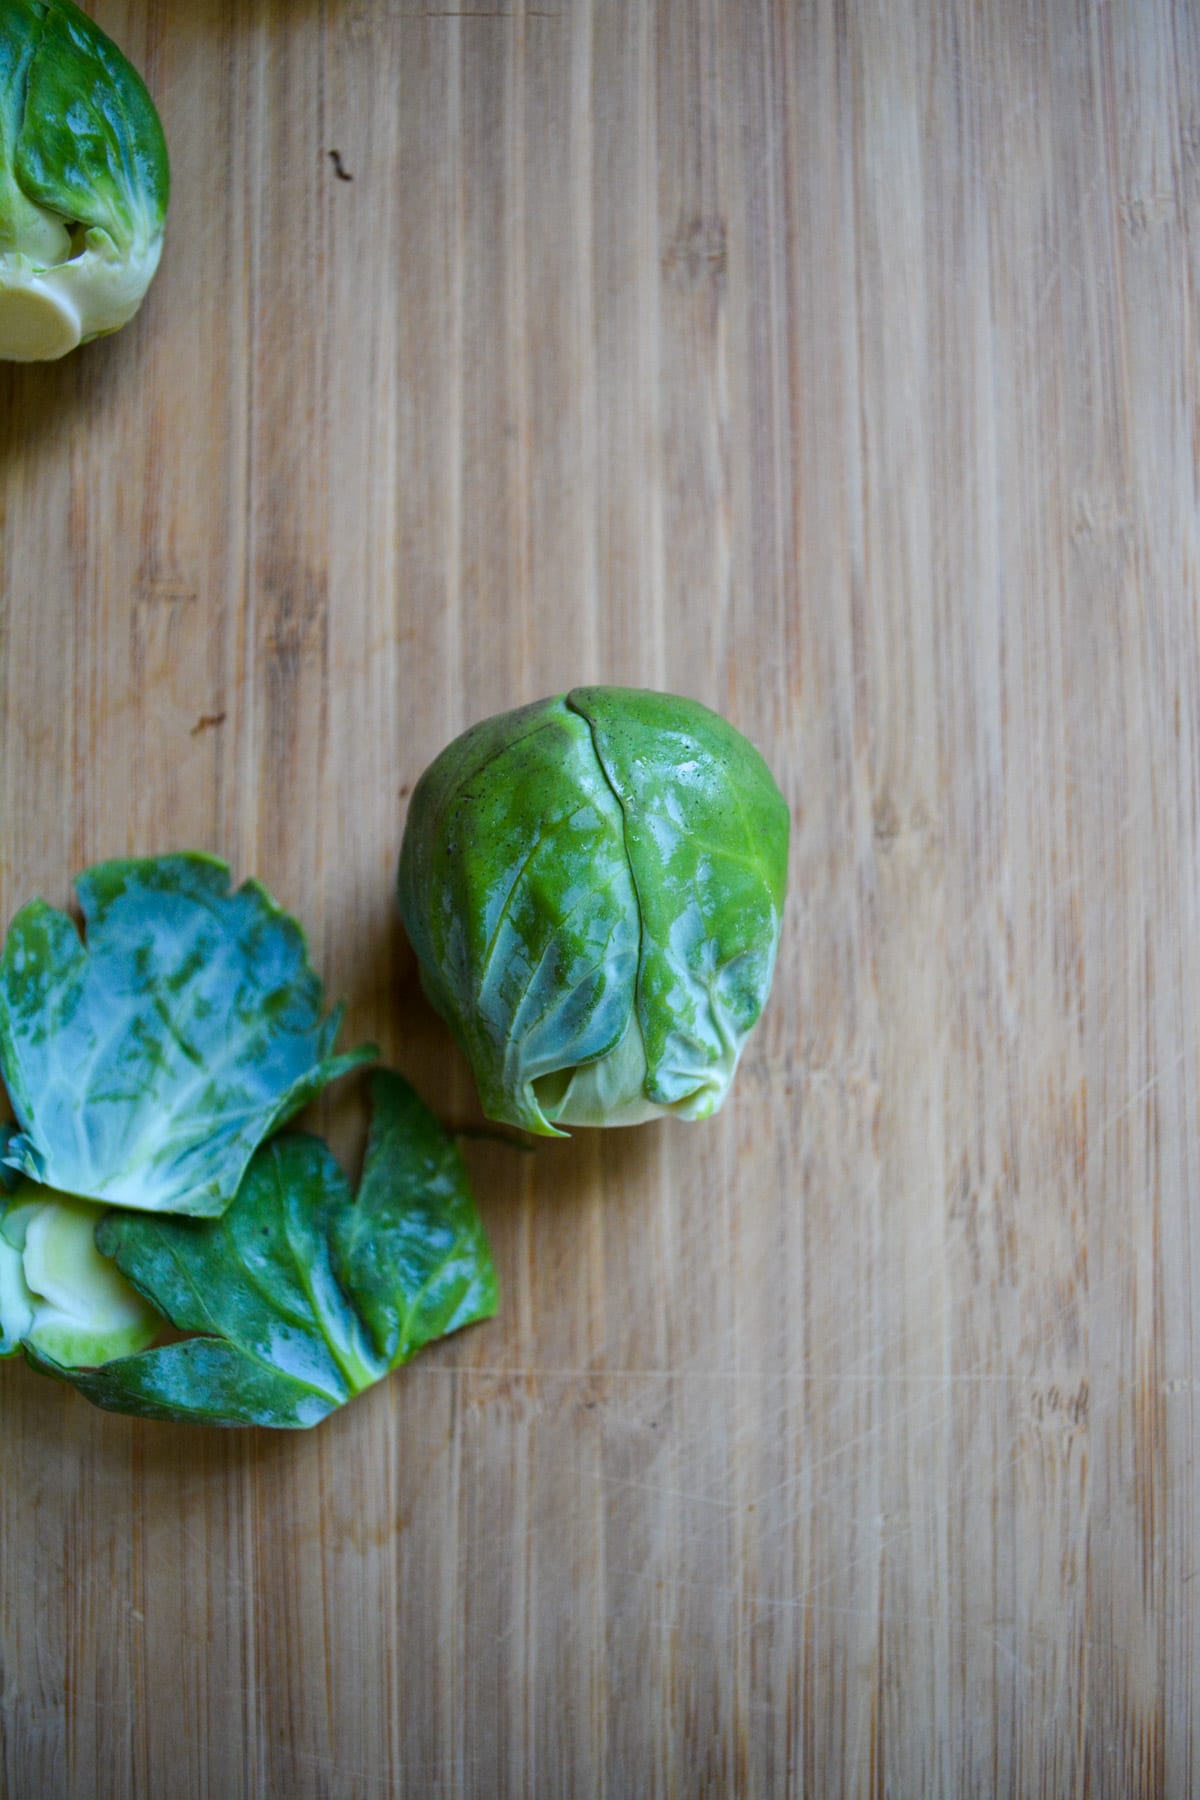 Brussels sprout on a cutting board with the root cut off.